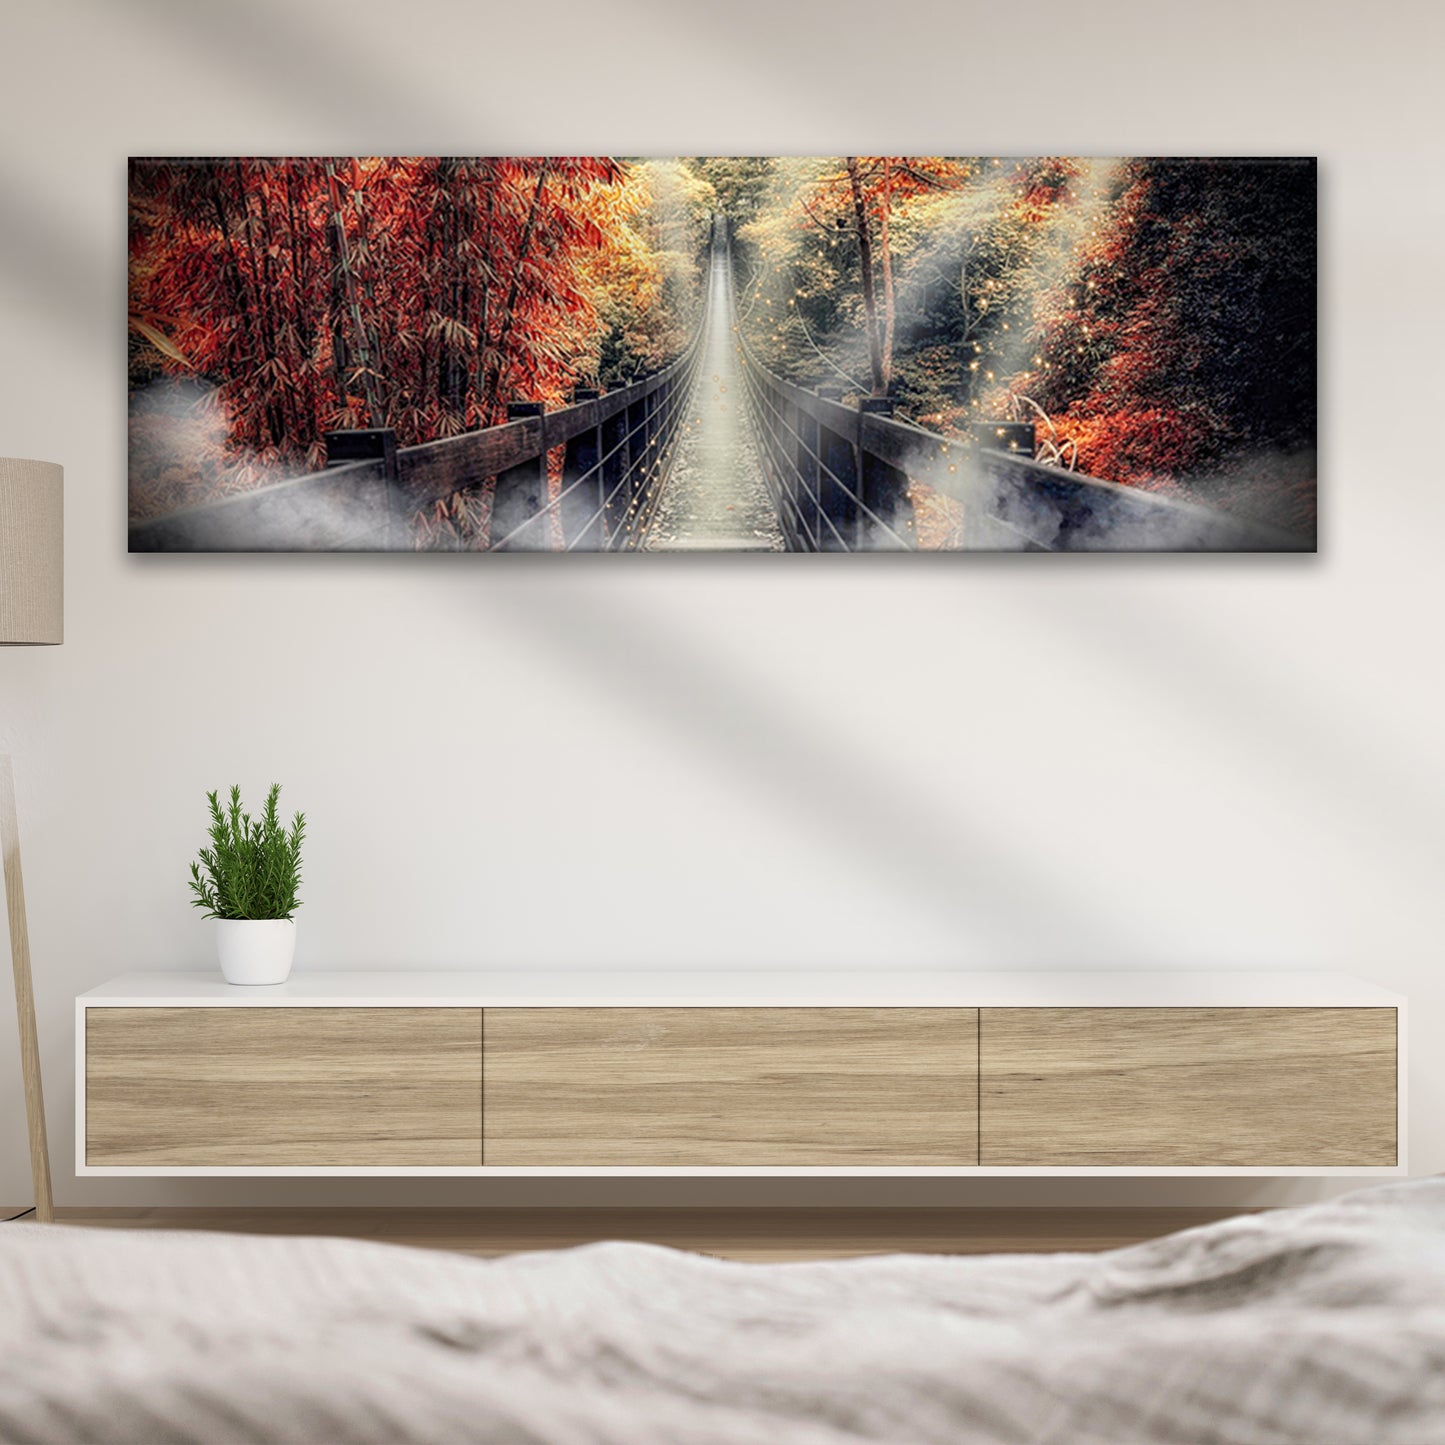 Autumn Walk On A Footbridge Canvas Wall Art Style 2 - Image by Tailored Canvases